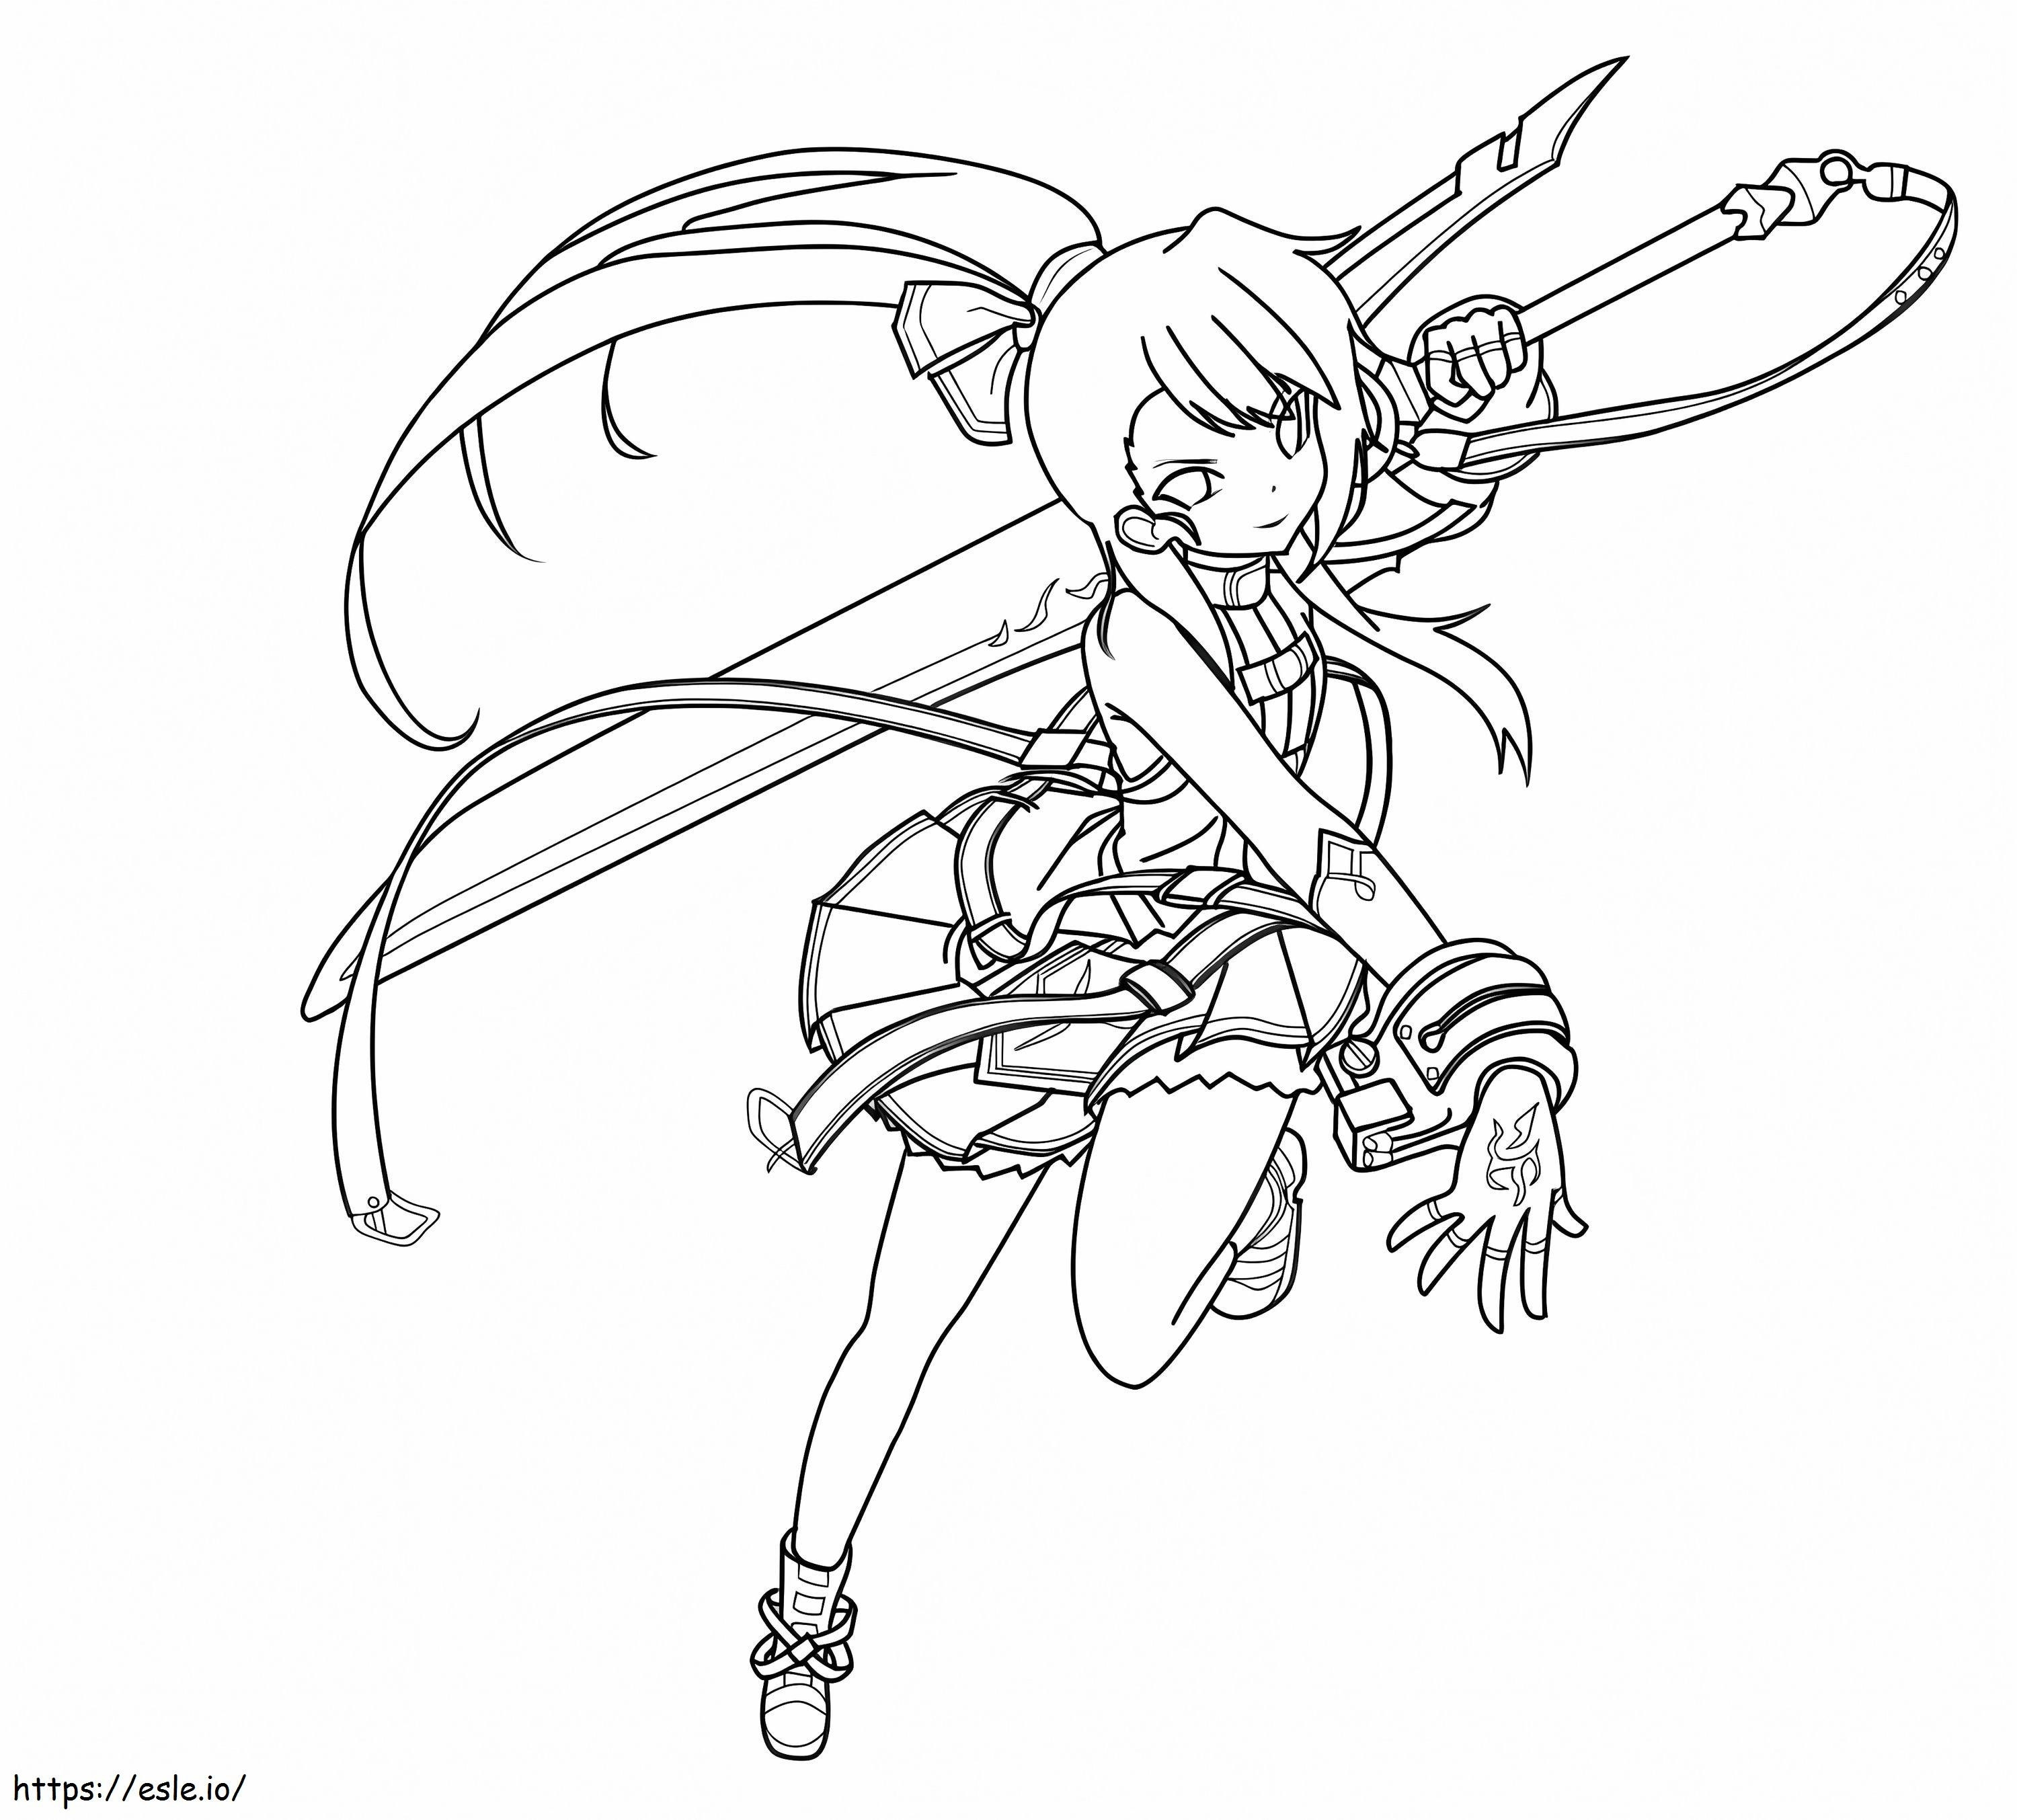 Elesis coloring page